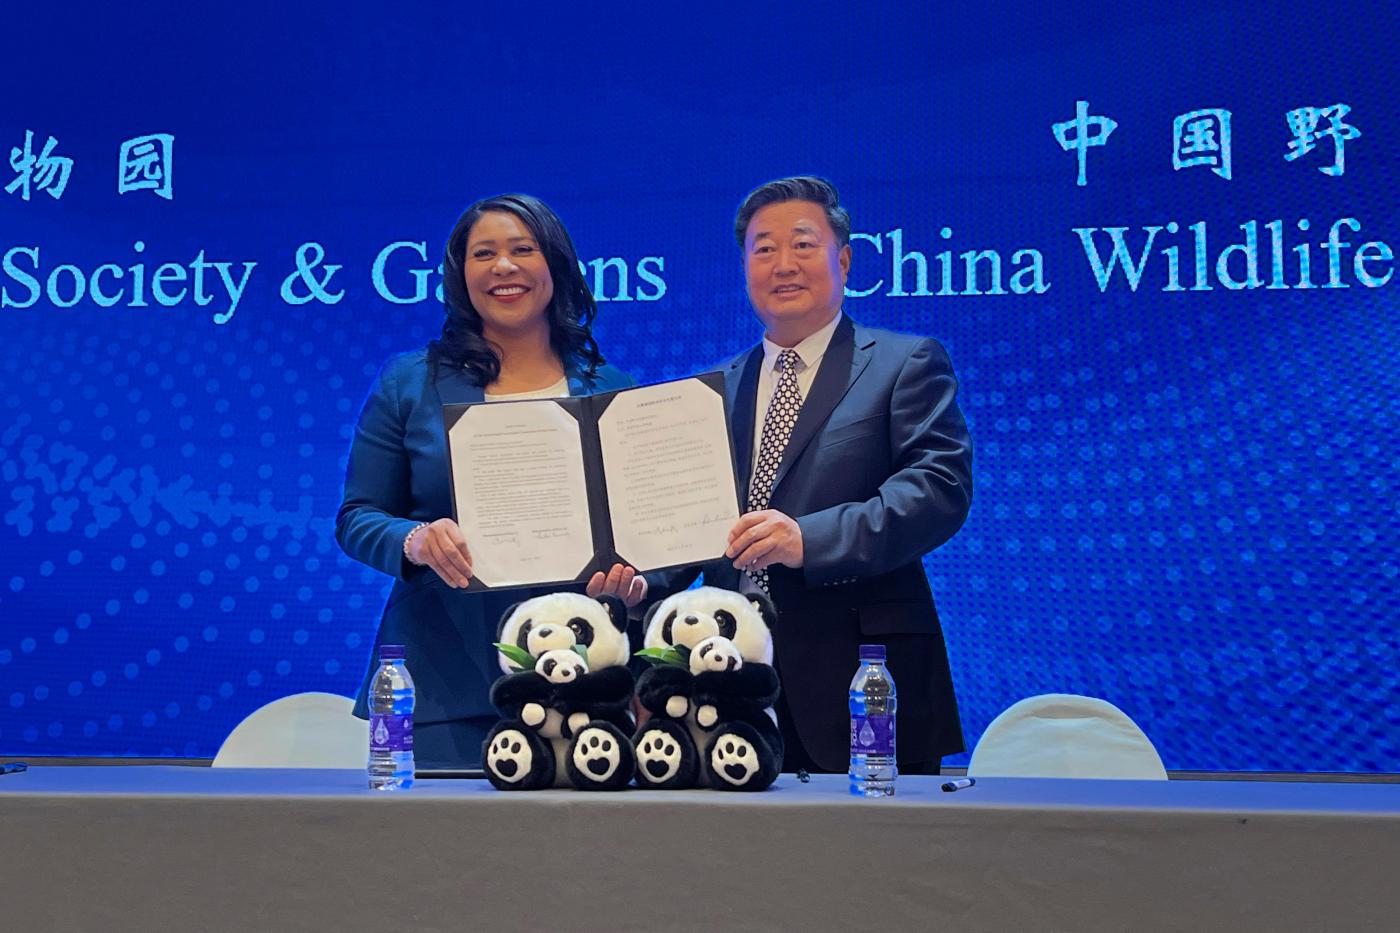 san-francisco-mayor-announces-the-city-will-receive-pandas-from-china